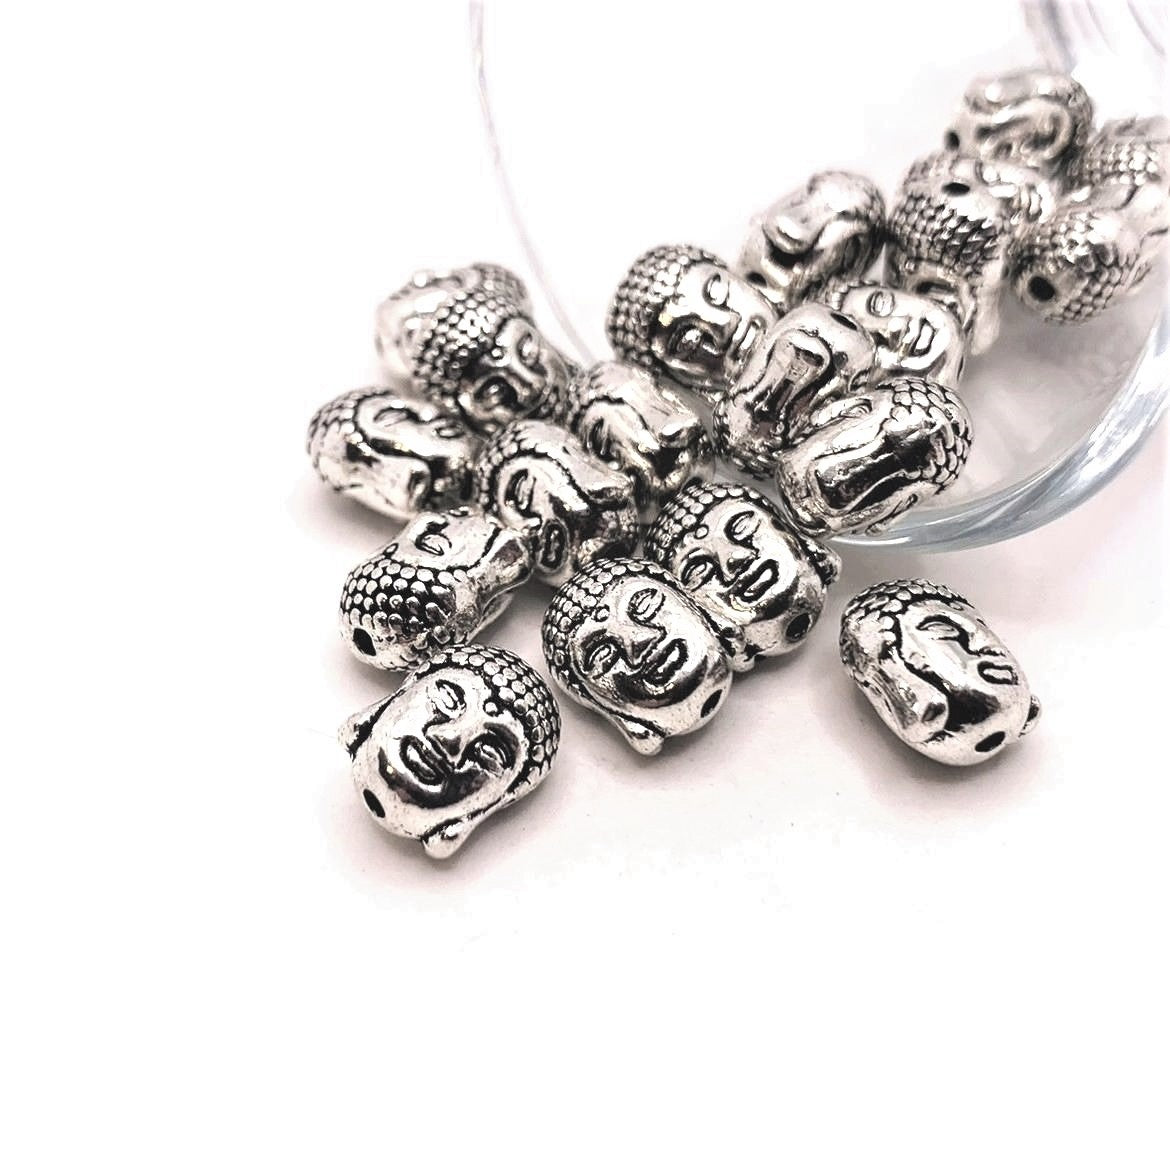 4, 20 or 50 Pieces: Silver Happy Buddha Head Beads